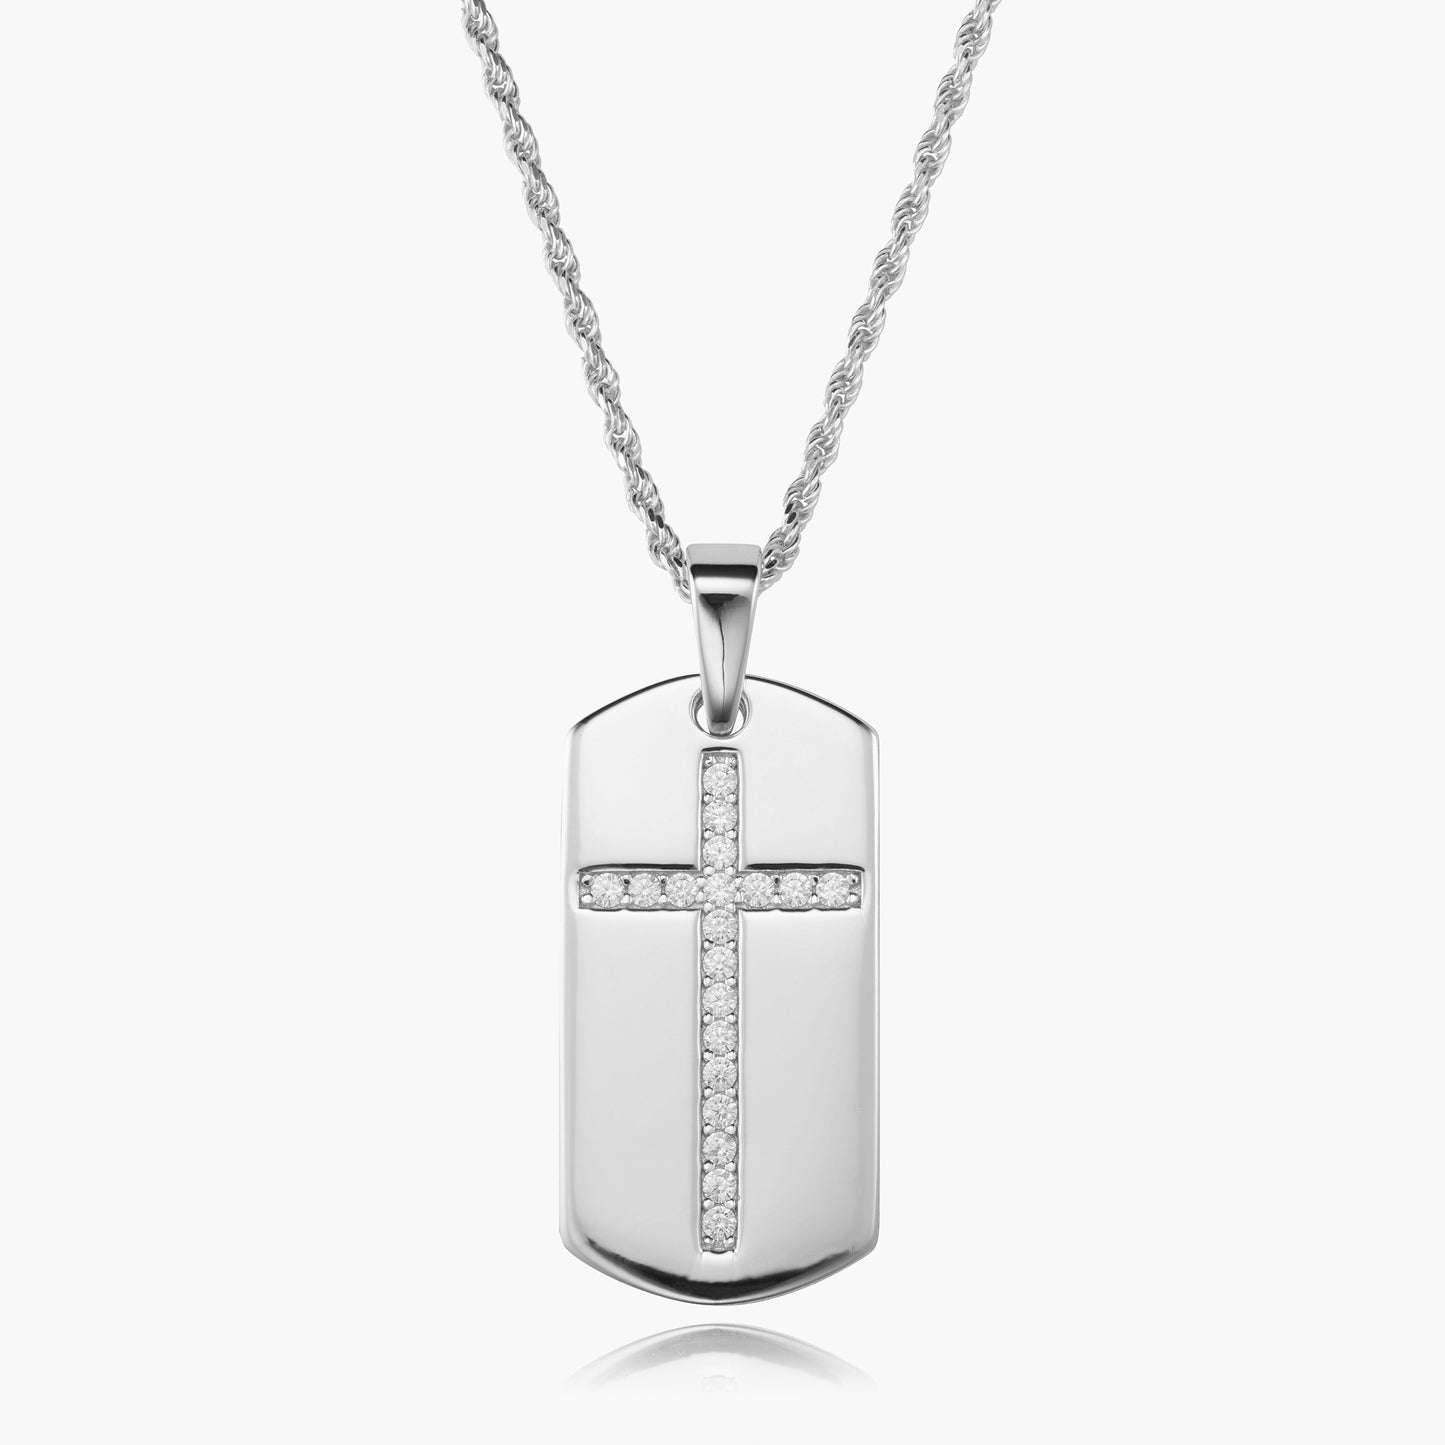 The Dog Tag With Iced Cross